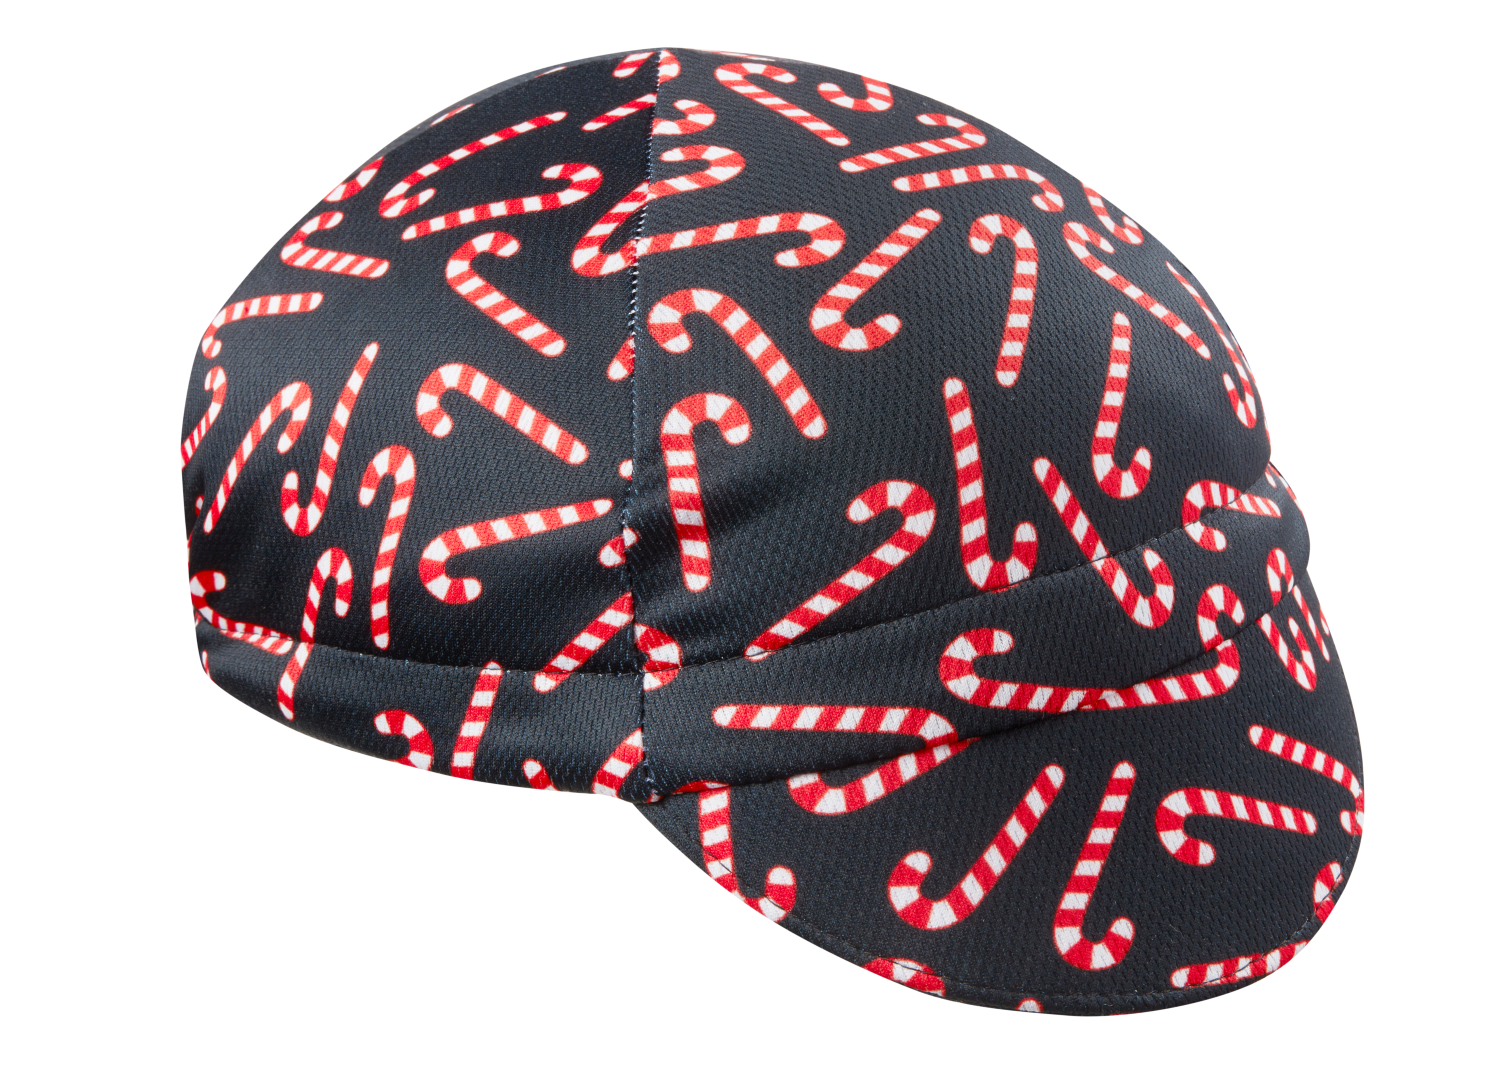 Candy Cane Cap Technical 4-Panel.  Black cap with candy cane print.  Angled View.